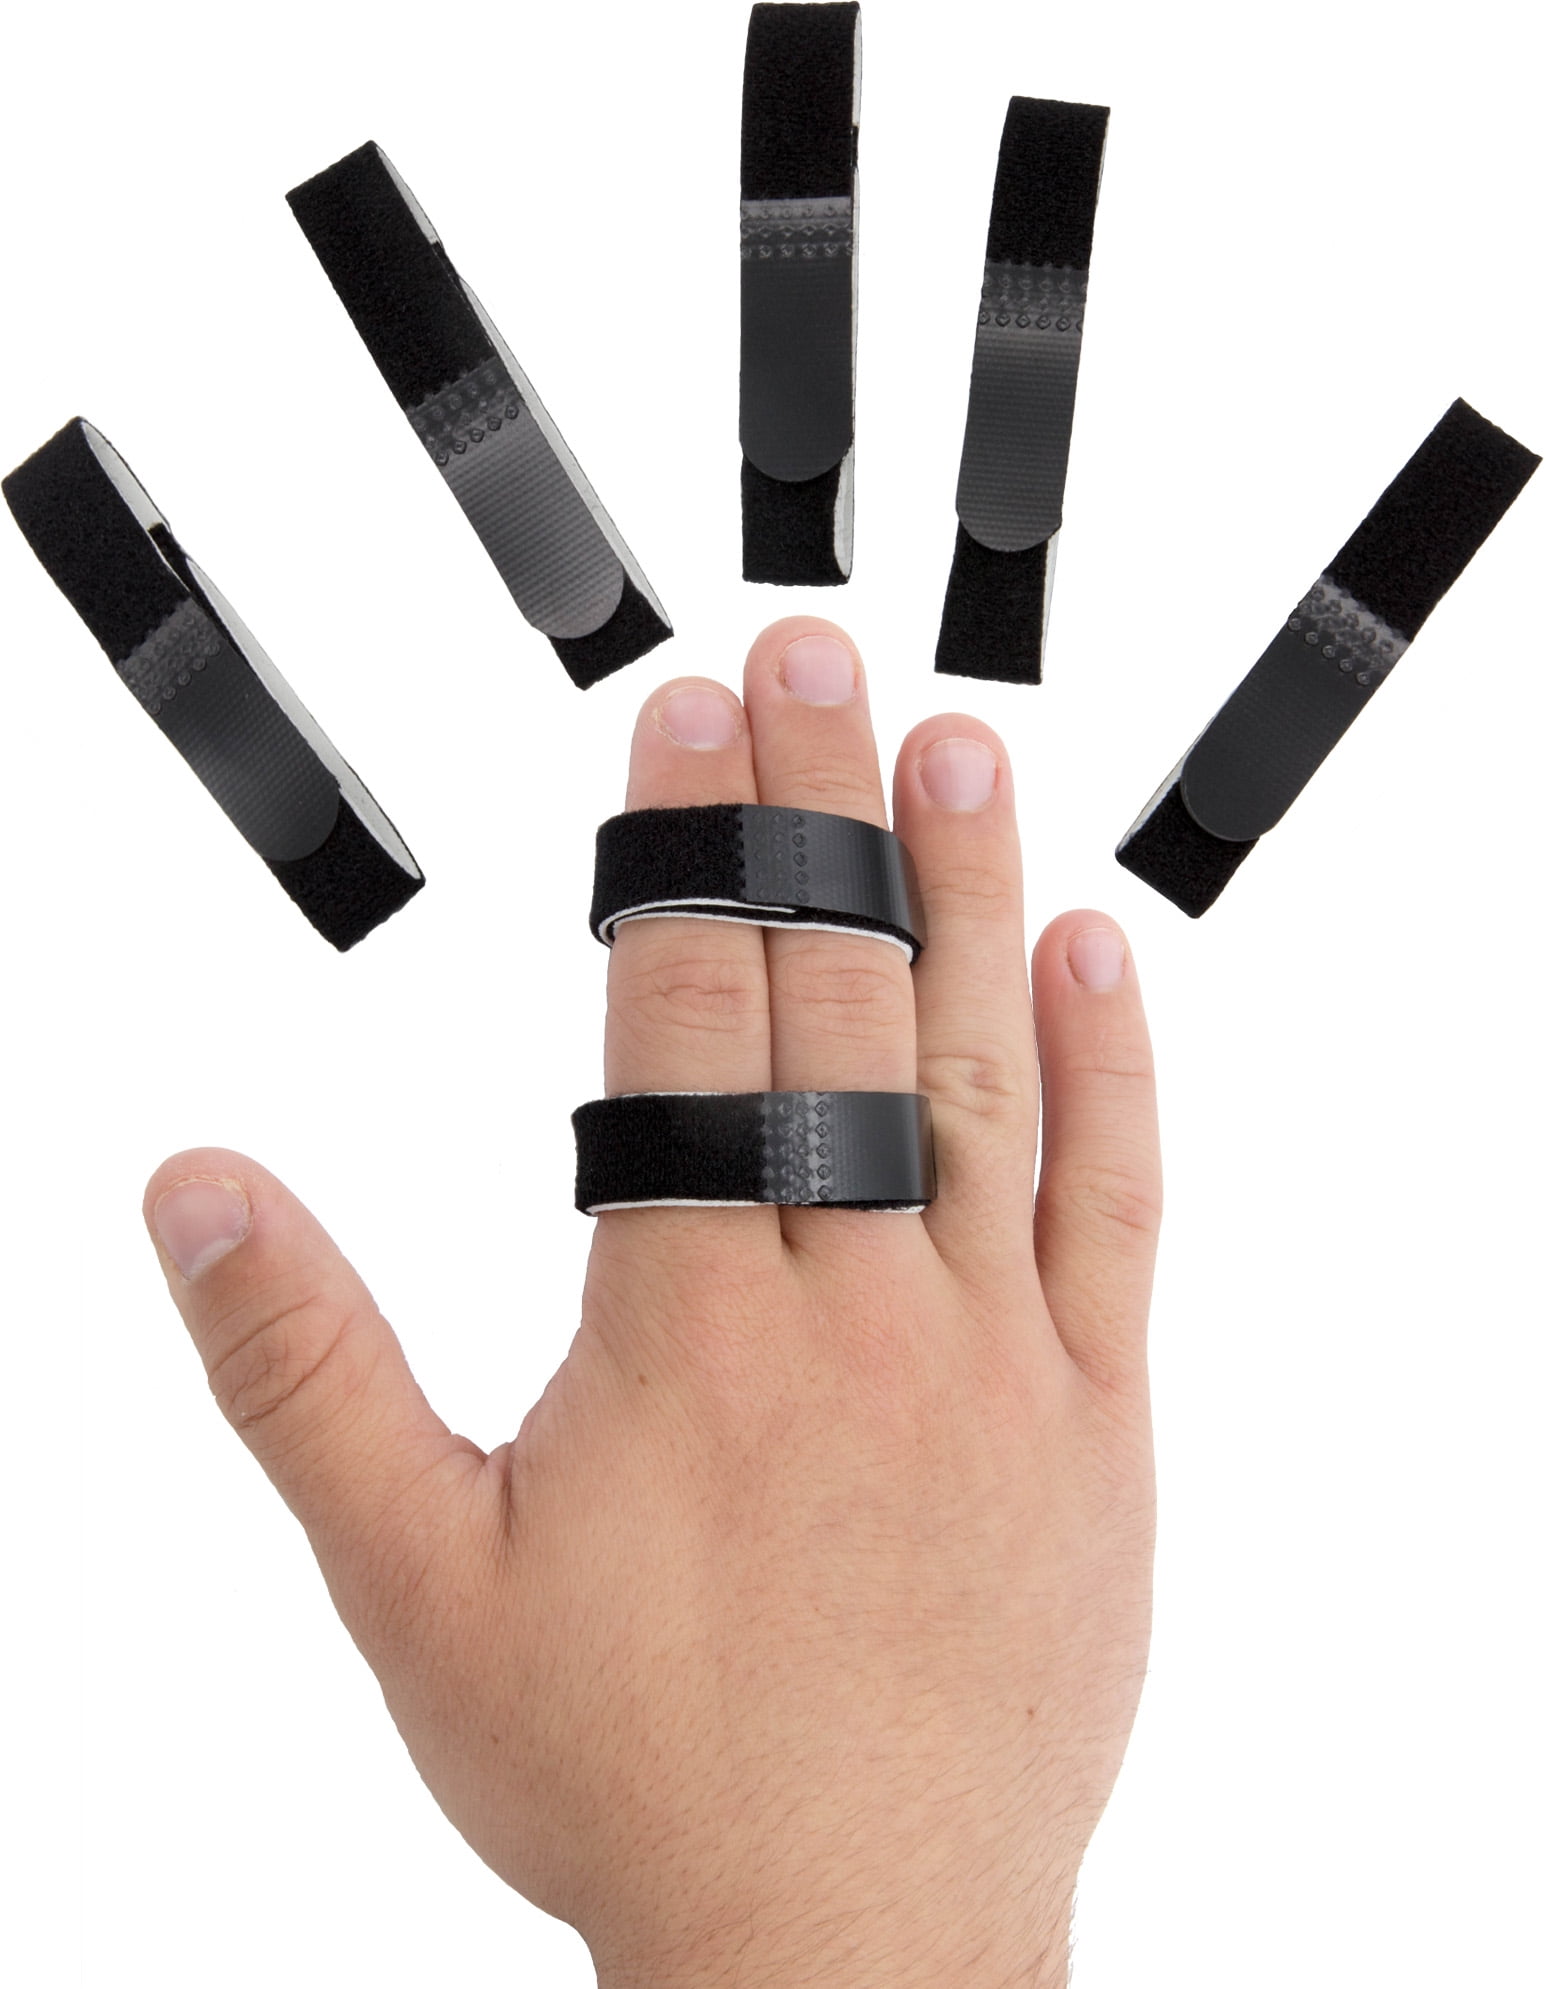 Learn How to Buddy Tape a Finger